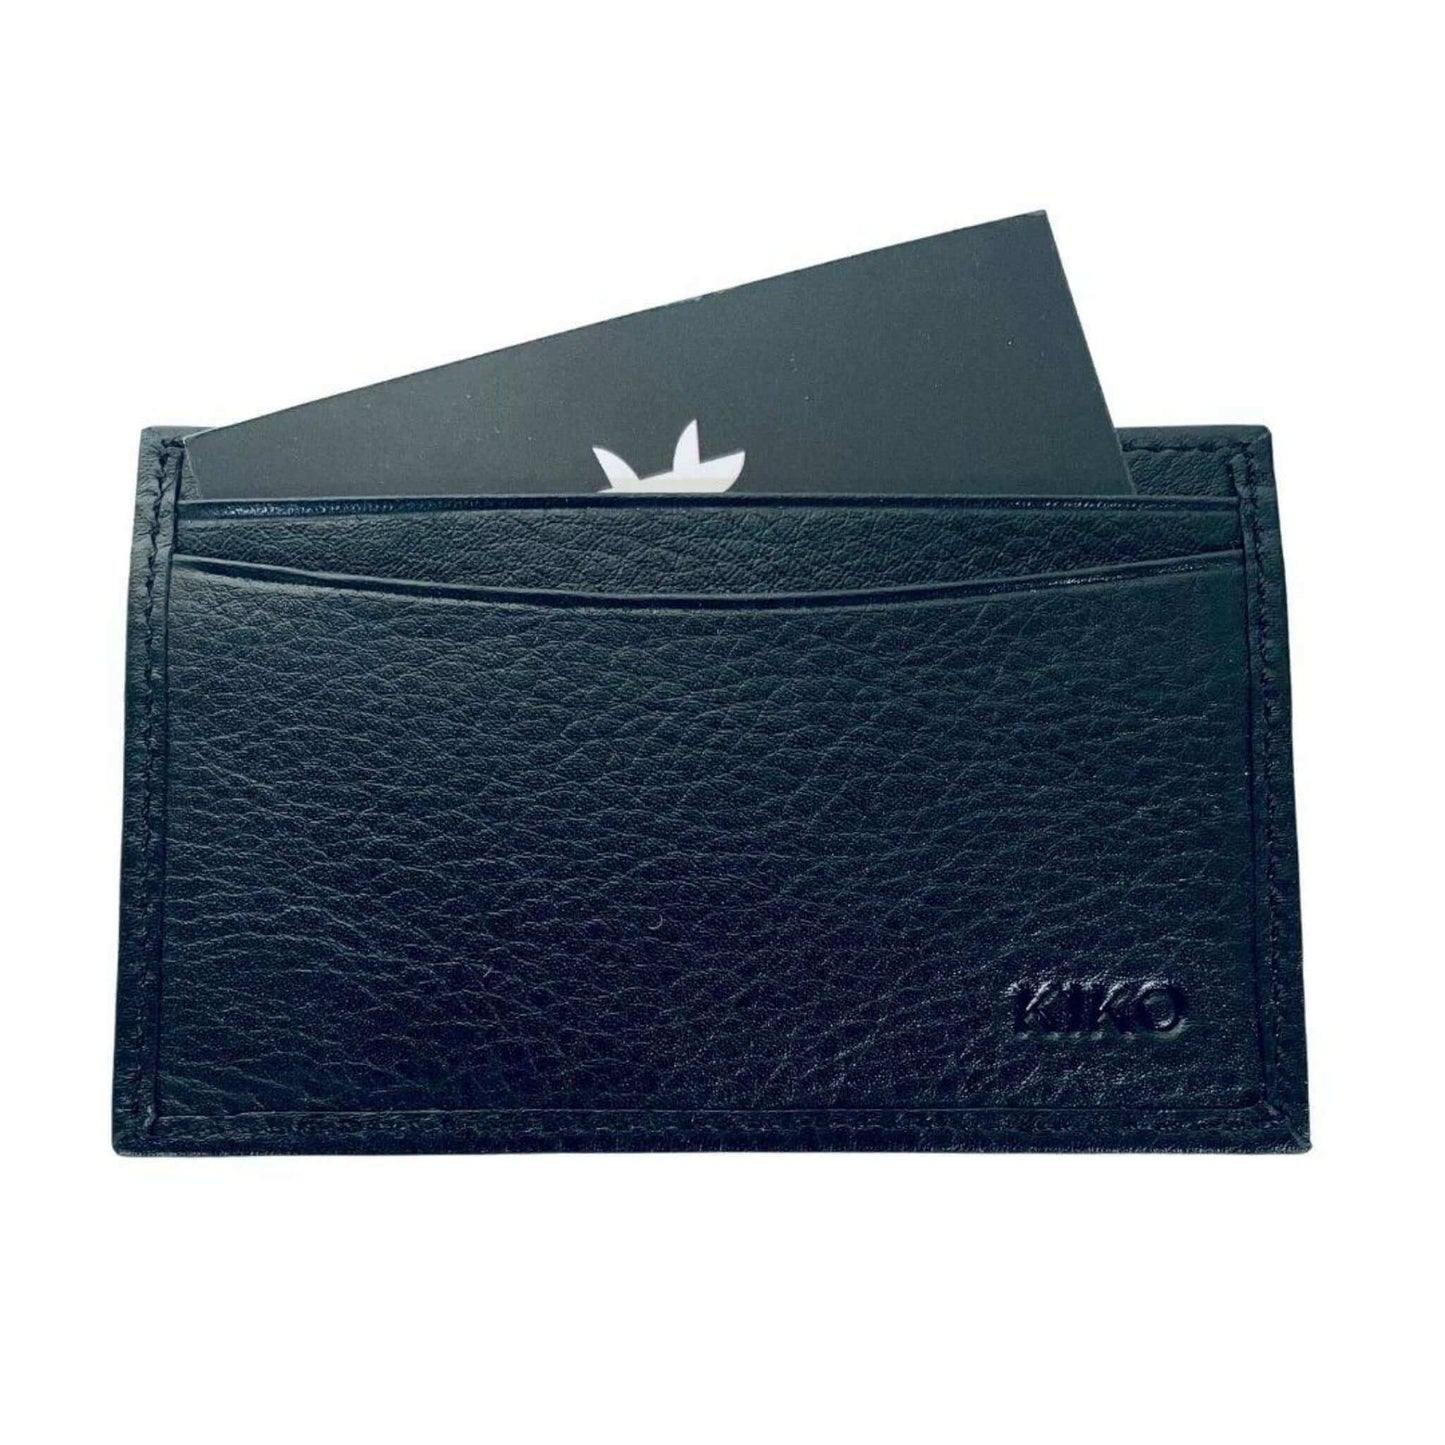 Sleek black leather card and cash holder with classic Adidas logo, designed for organized storage and everyday convenience.